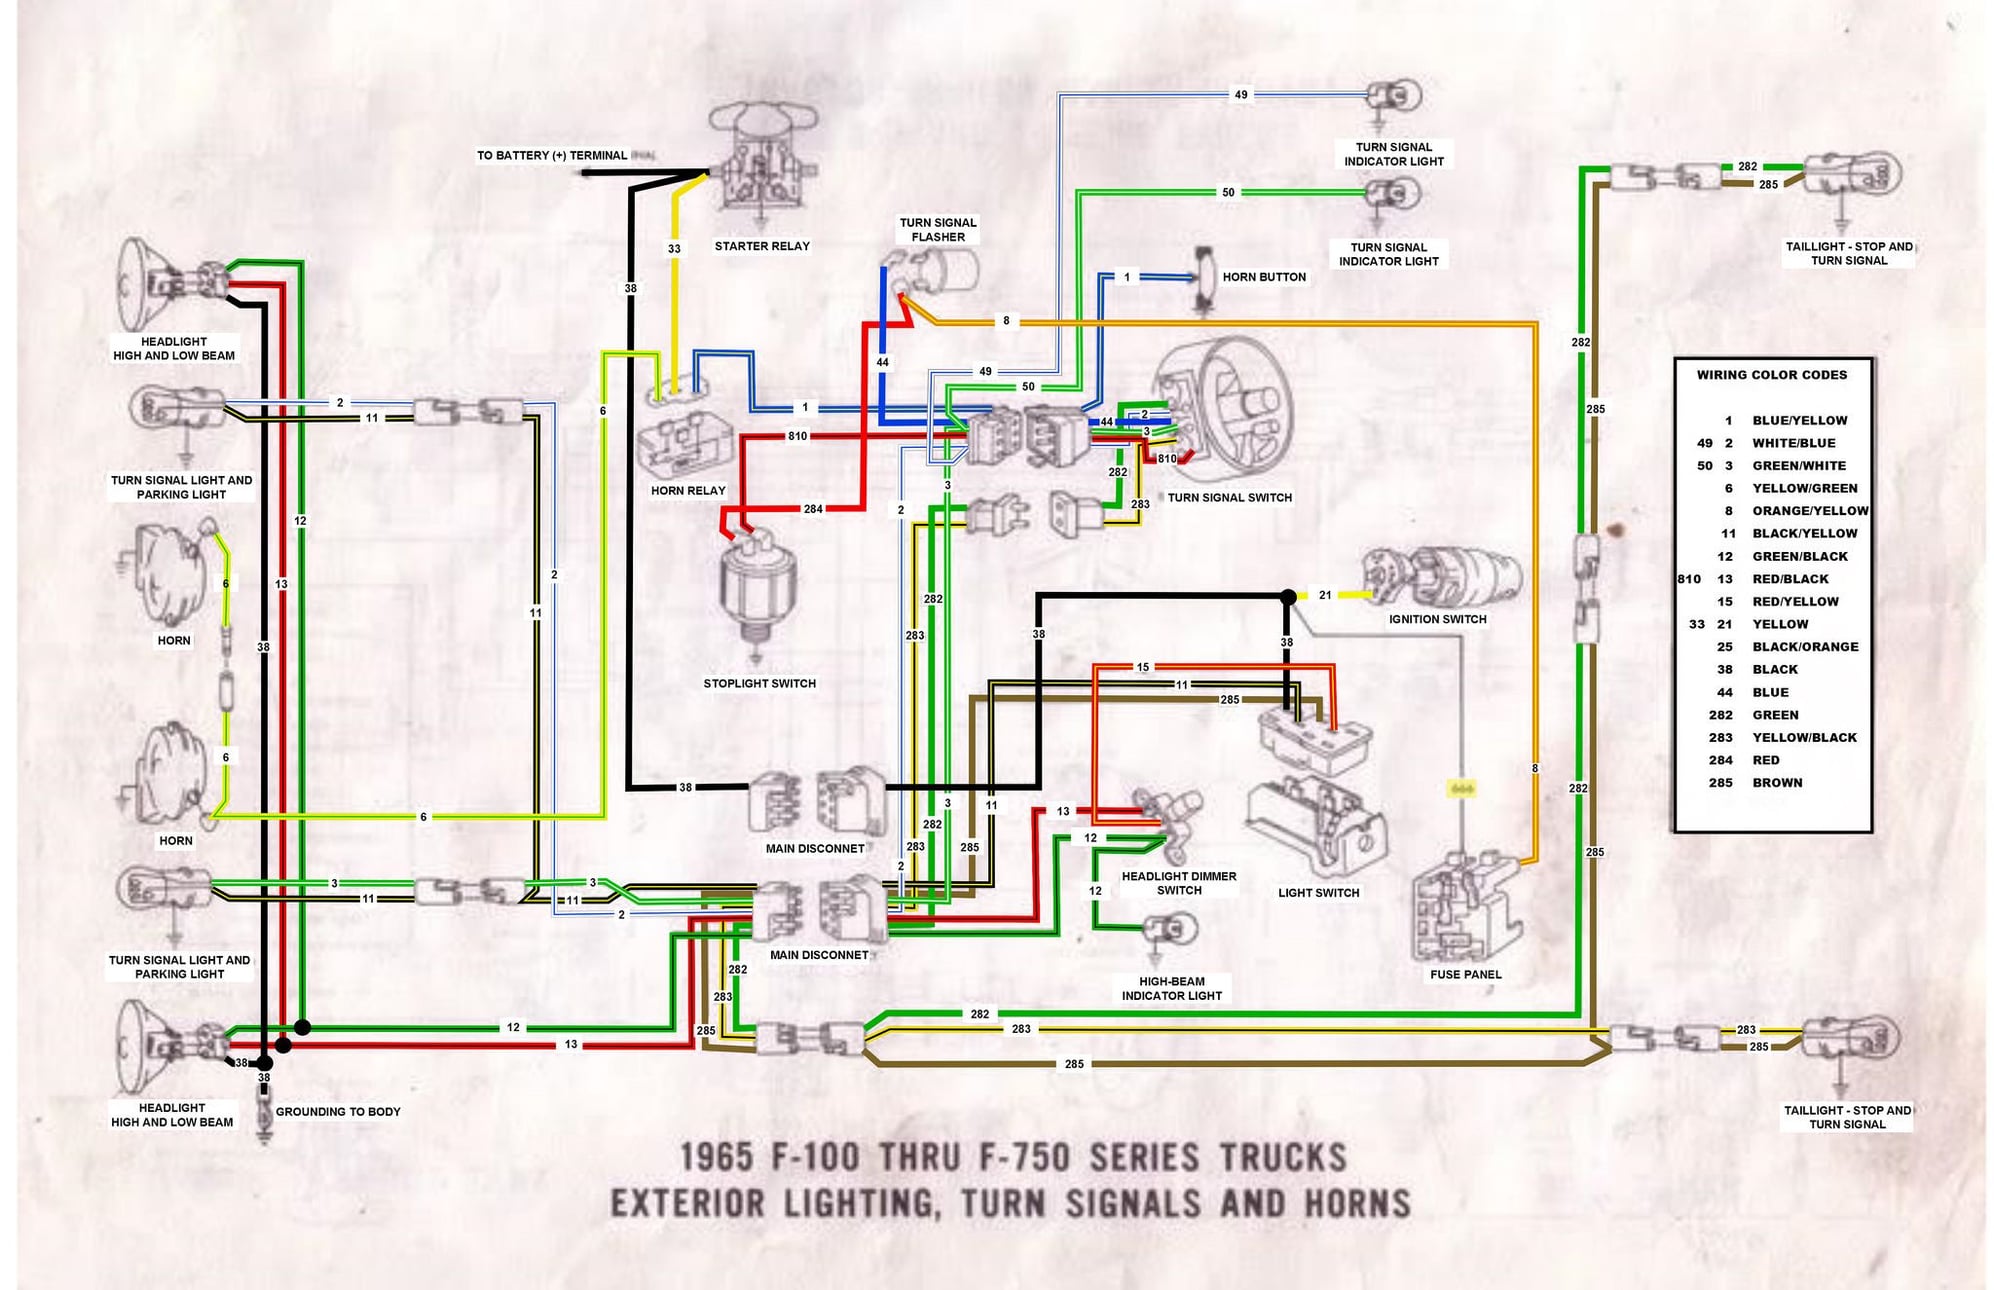 65 F100 thru F750 exterior wiring diagram - Ford Truck Enthusiasts Forums  2003 Ford F 750 Wiring Diagram    Ford Truck Enthusiasts